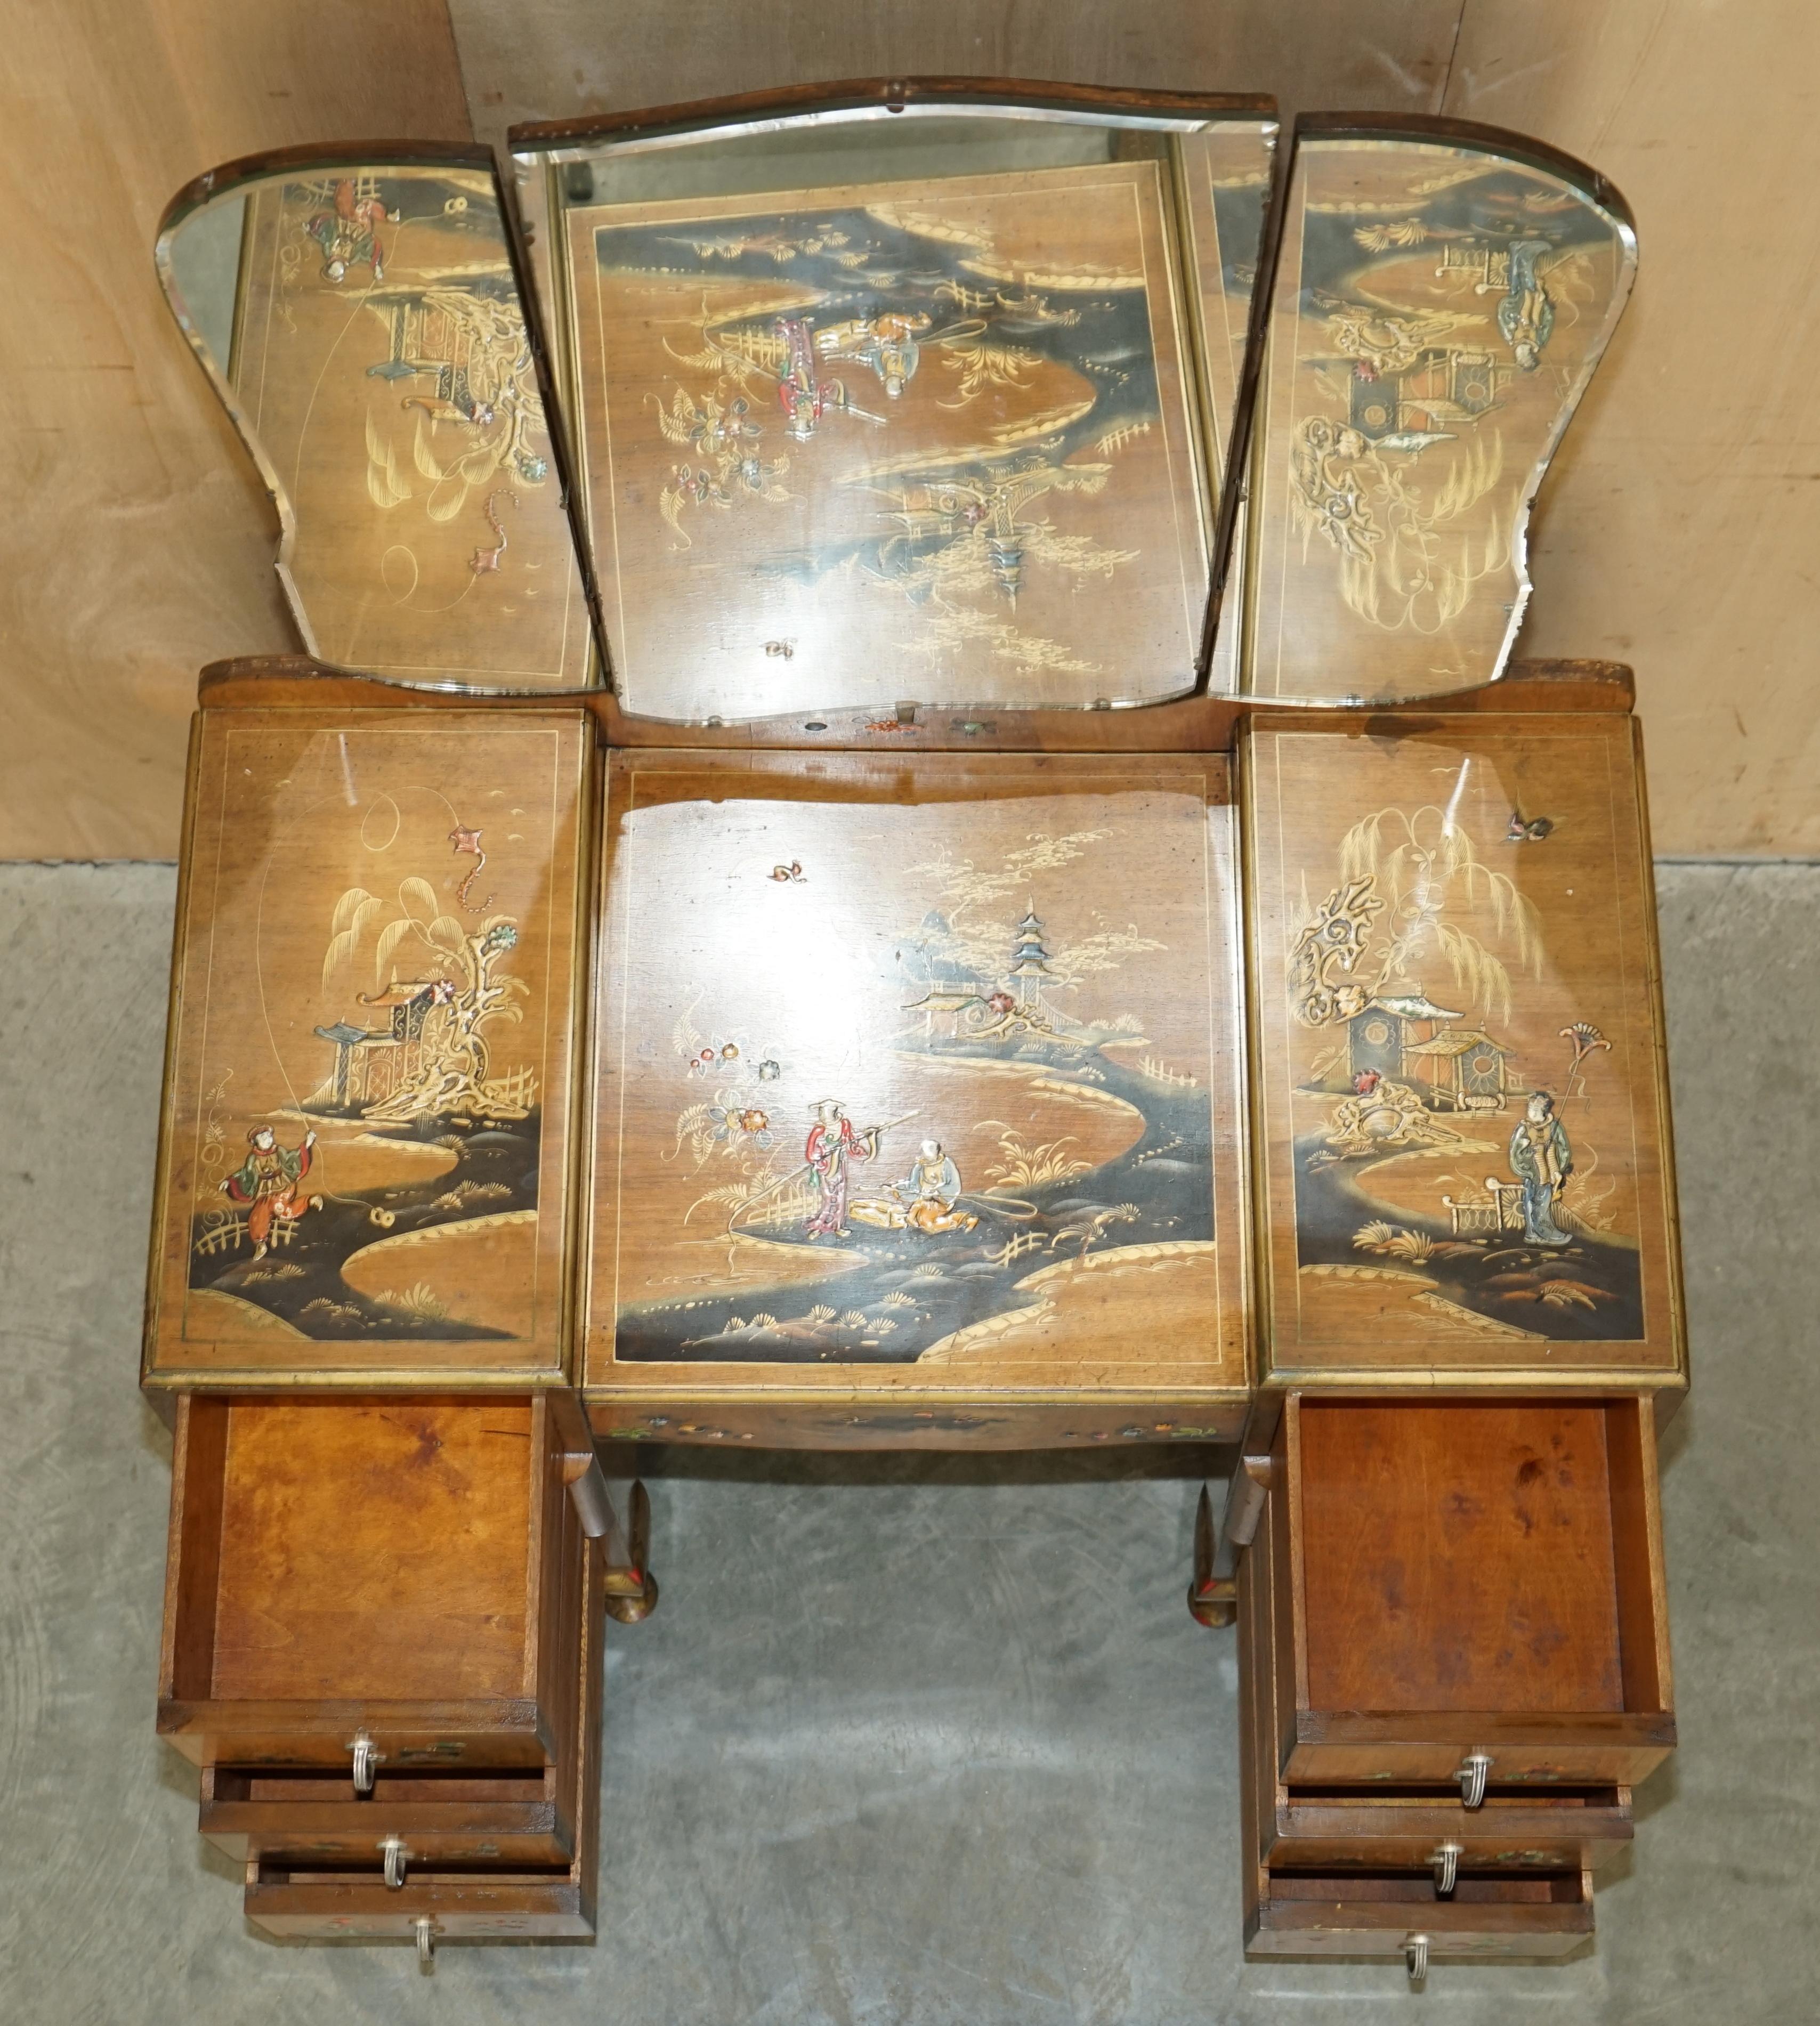 EXQUISITE CHiNESE EXPORT CHINOISERIE WALNUT DRESSING TABLE PART OF A SUITe For Sale 12